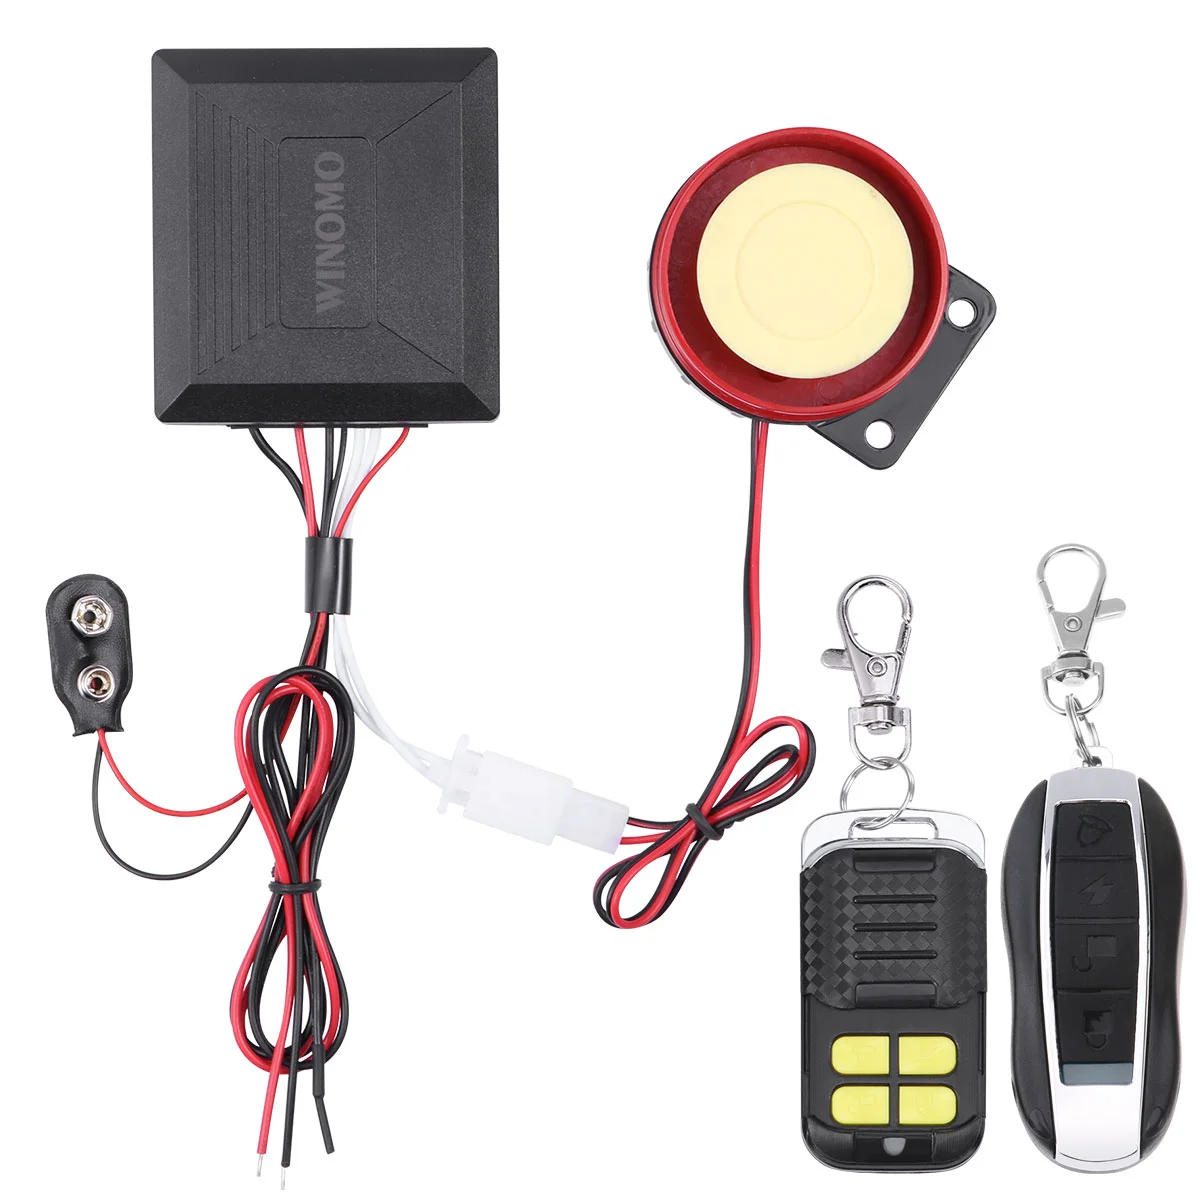 WINOMO 12v Universal Motorcycle Motorbike Scooter Anti Theft Security Alarm System with Double winomo 12v universal motorcycle motorbike scooter anti theft security alarm system with double